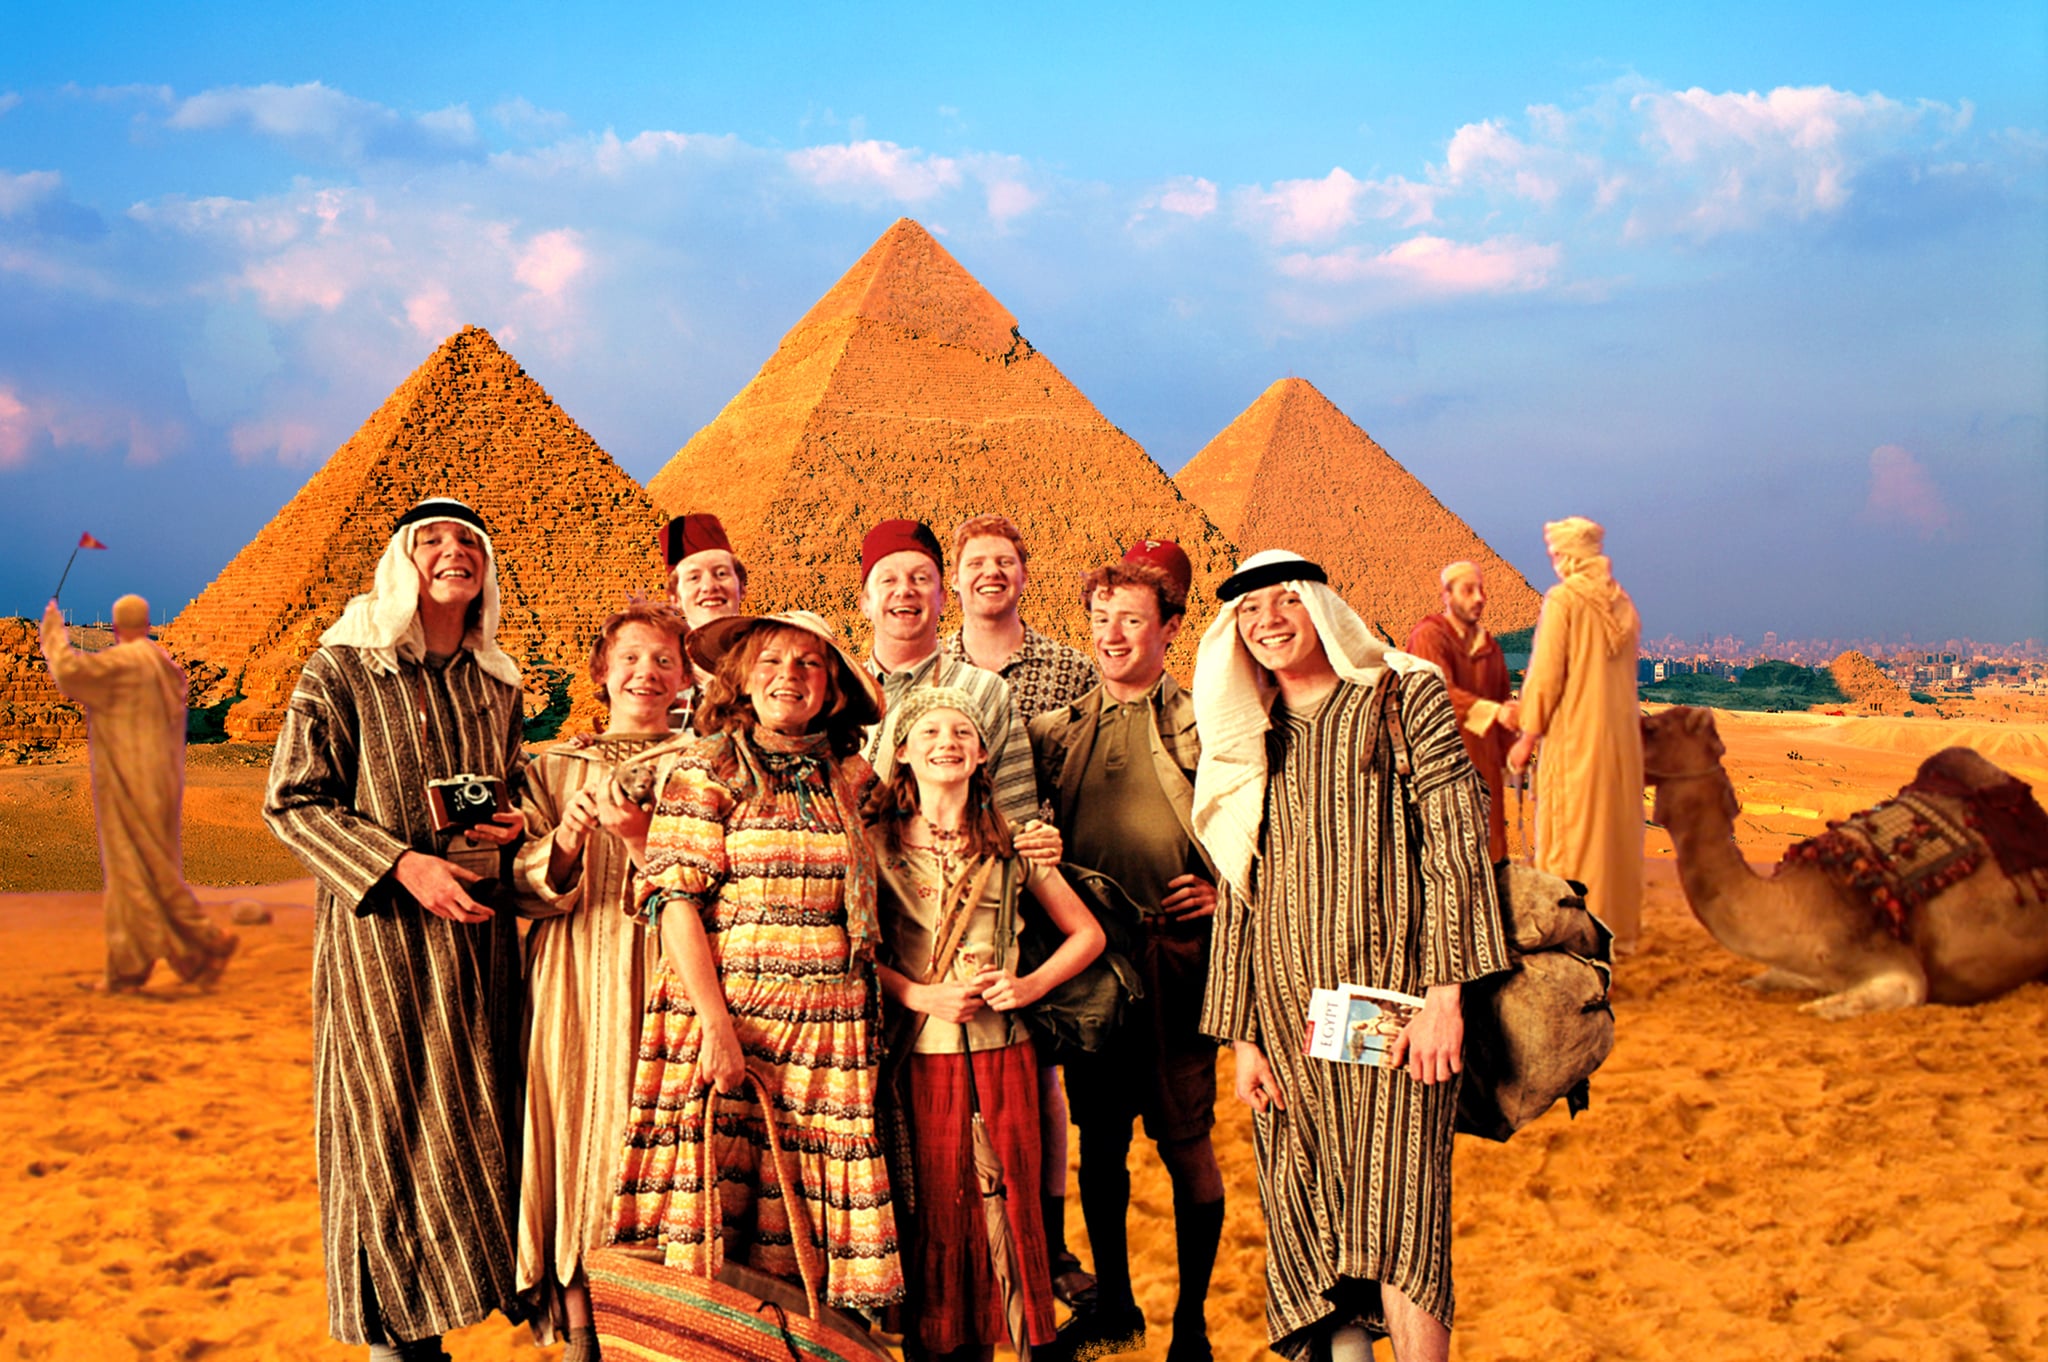 HARRY POTTER AND THE PRISONER OF AZKABAN, The Weasley Family's vacation postcard; Rupert Grint (second from left), Julie Walters (front row, left), Bonnie Wright (front row, right), 2004,  Warner Brothers/courtesy Everett Collection